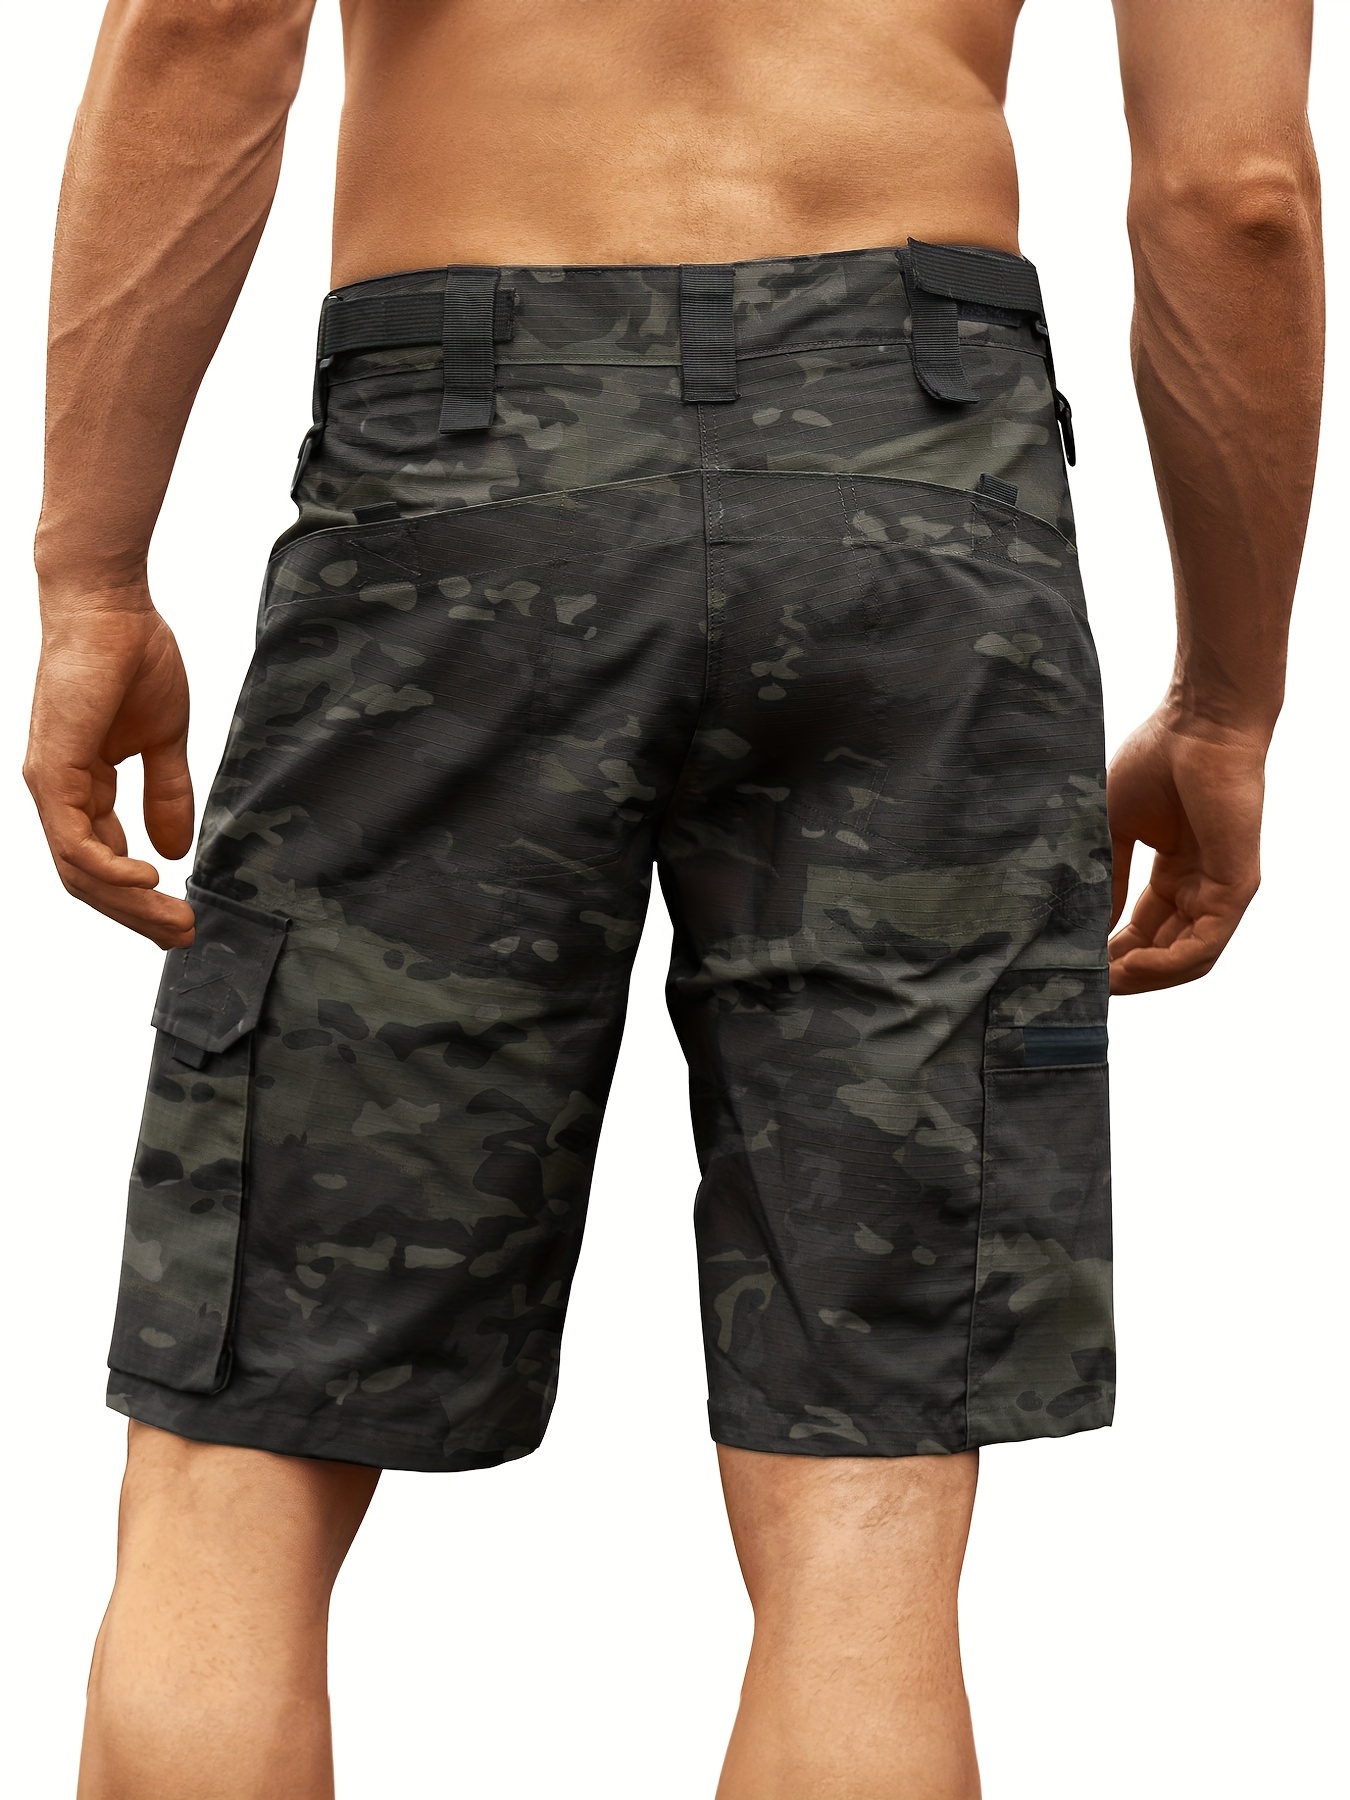 FAVIPT Mens Cargo 5 Inch Shorts for Hiking Golf Casual Athletic Quick Dry  Ralaxed Fit Fishing Tactical Sports Shorts